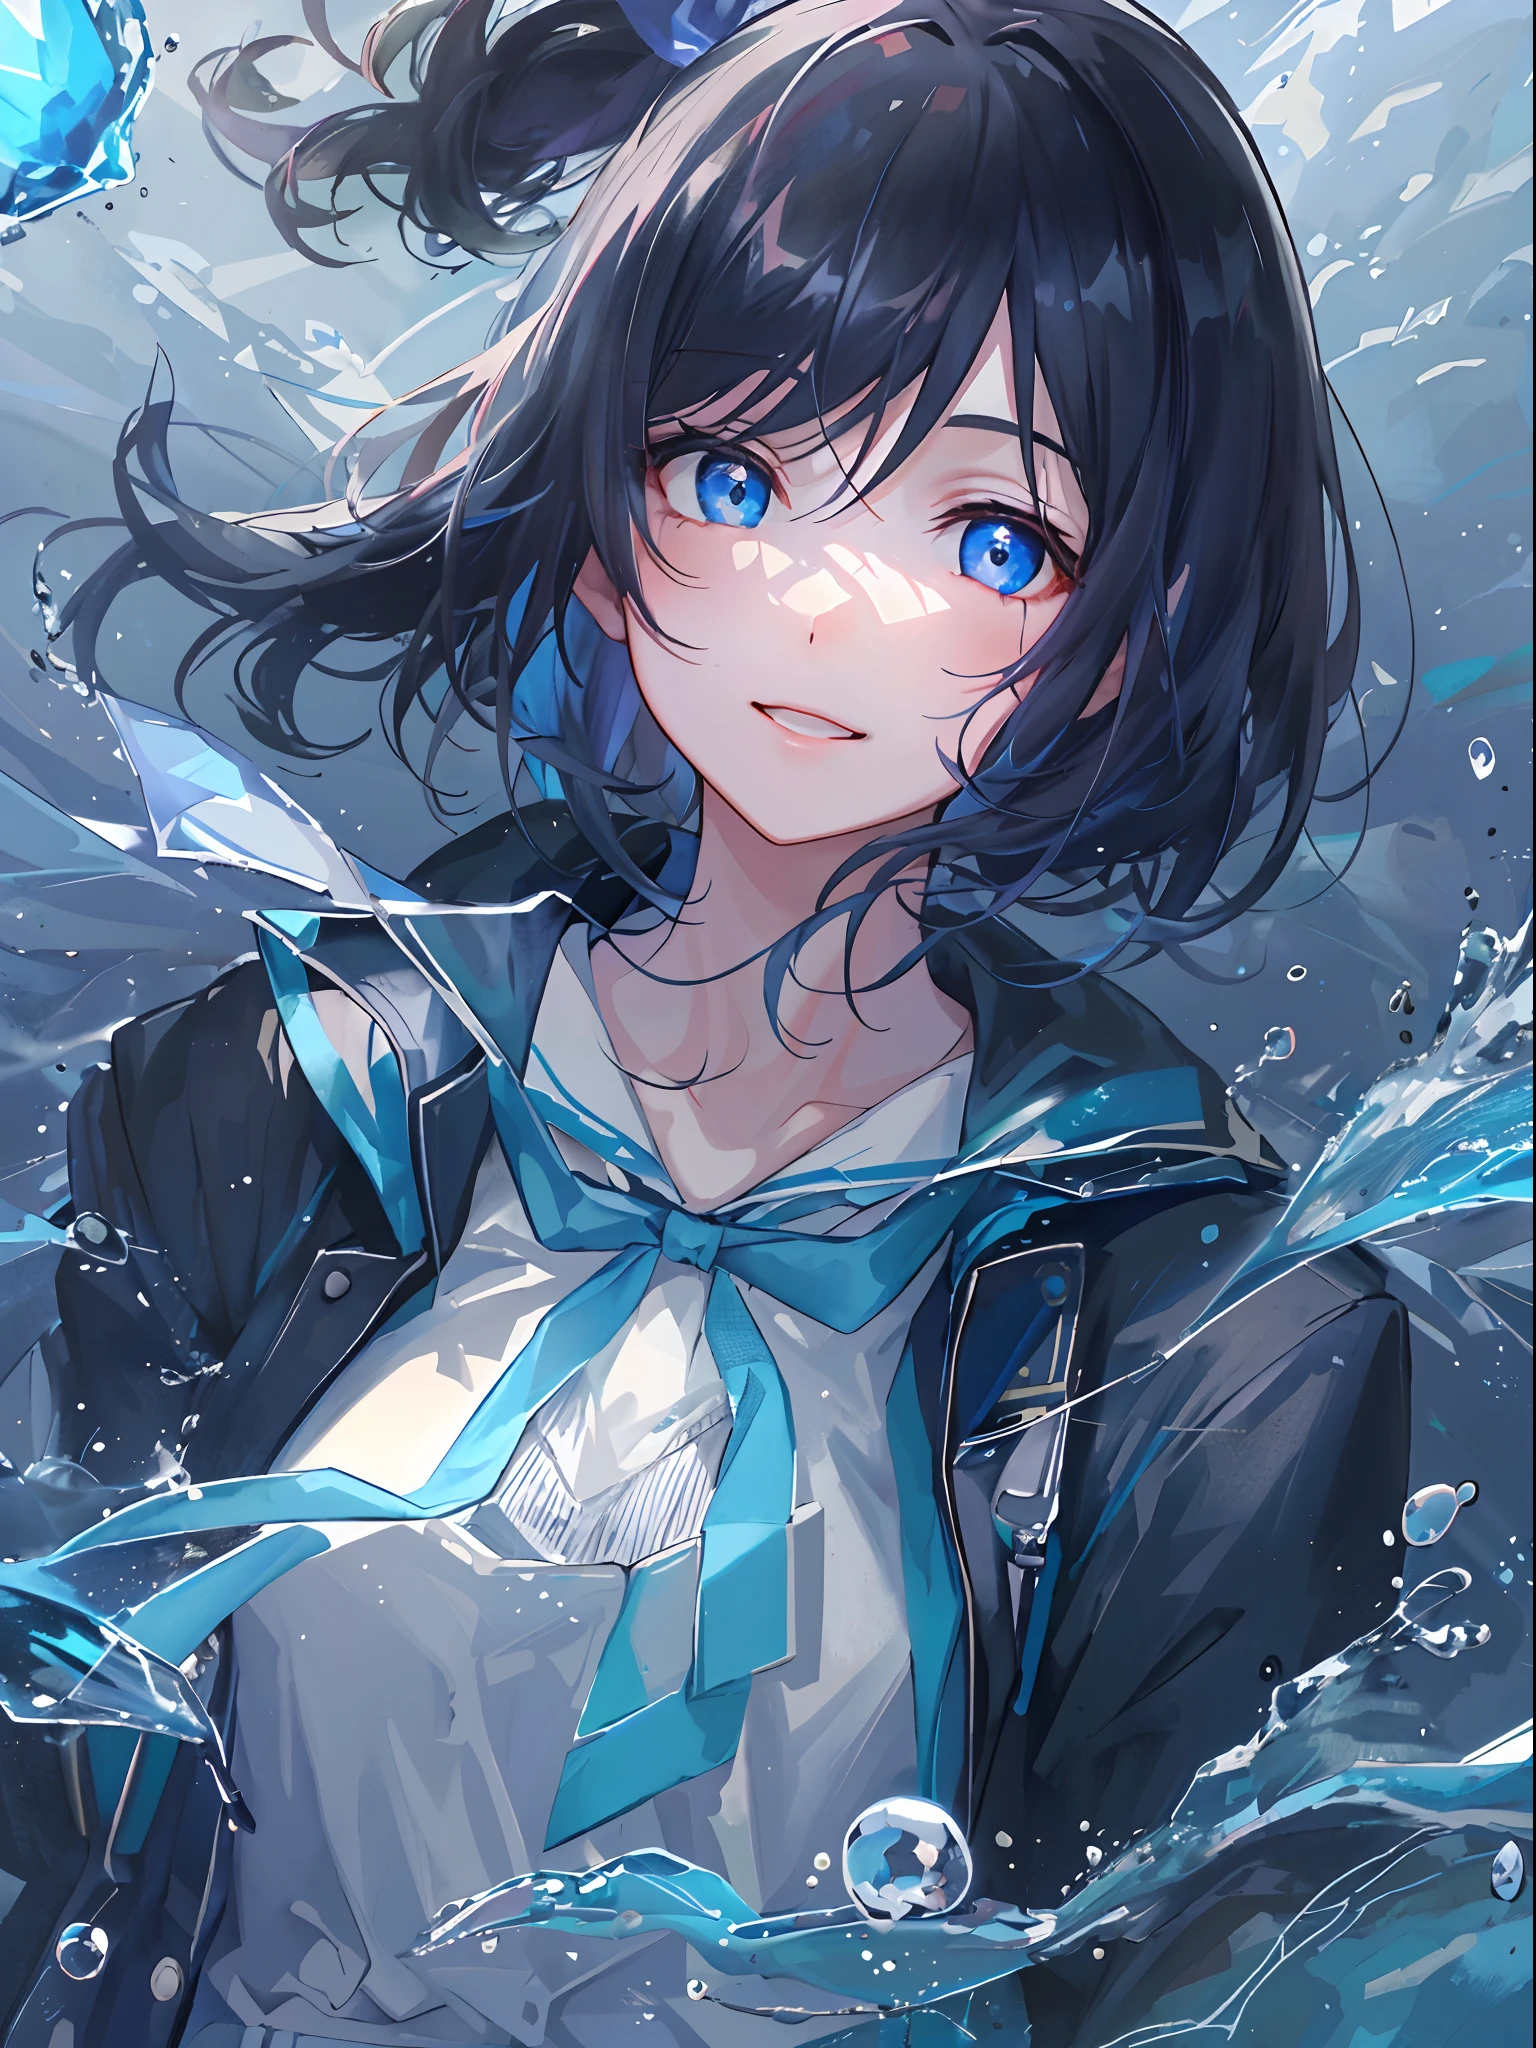 ((top-quality)), ((​masterpiece)), ((Ultra-detail)), (extremely delicate and beautiful), girl with, solo, cold attitude,((Black jacket)),She is very(relax)with  the(Settled down)Looks,A darK-haired, depth of fields,evil smile,Bubble, under the water, Air bubble,bright light blue eyes,Inner color with black hair and light blue tips,Cold background,Bob Hair - Linear Art, shortpants、knee high socks、White uniform like 、Light blue ribbon ties、Clothes are sheer、Hands in pockets, Bright eyes like sapphires, flourescent blue,